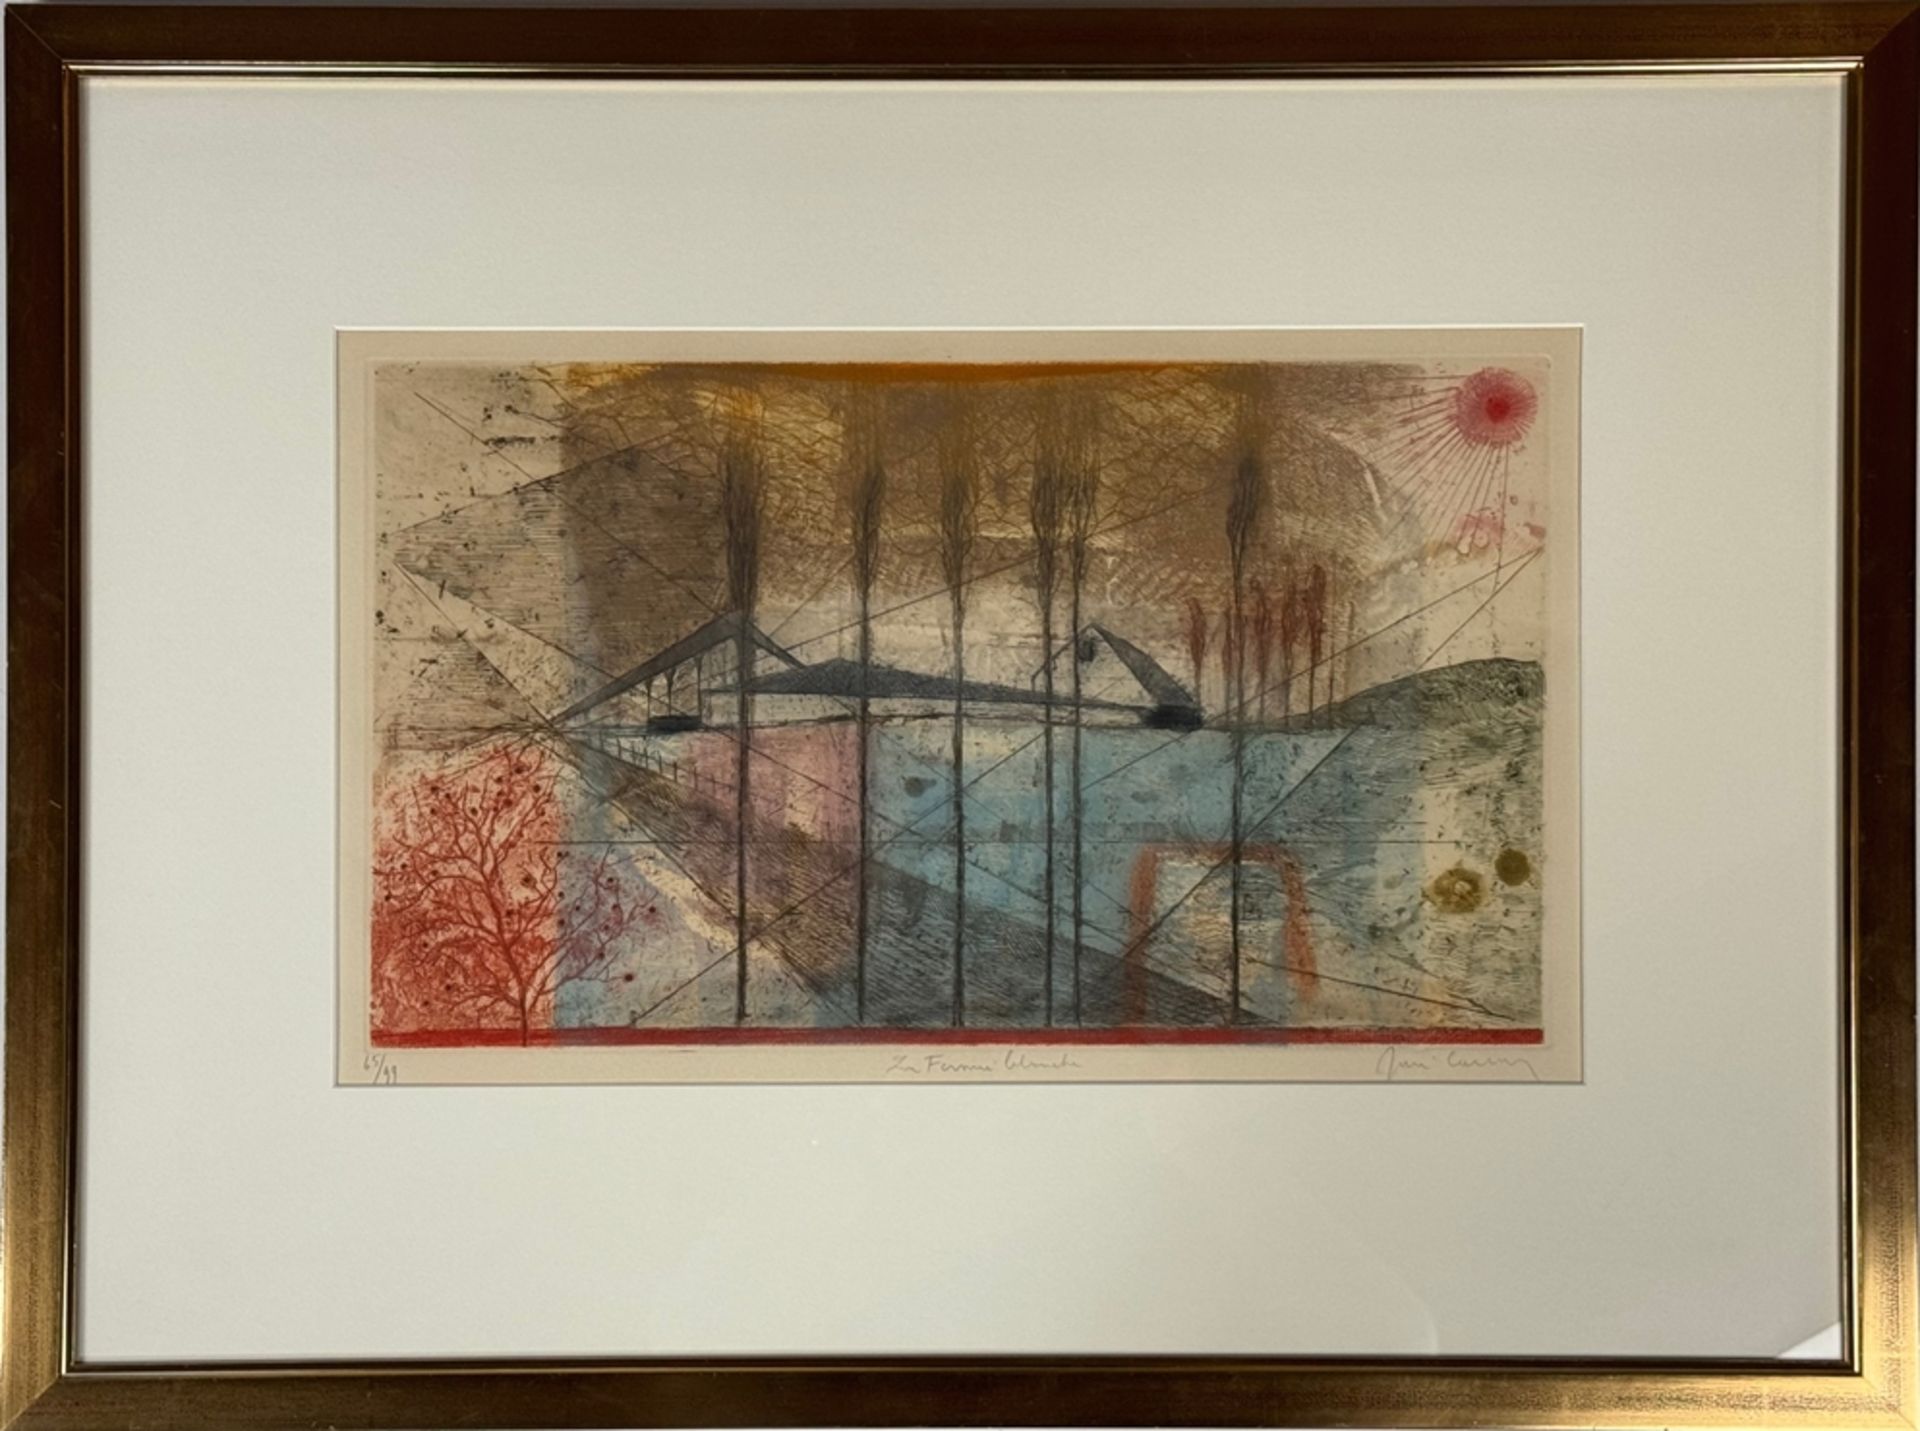 Graphic artist (20th century) Geometric landscape, colour etching, illegibly signed lower right, il - Image 2 of 3